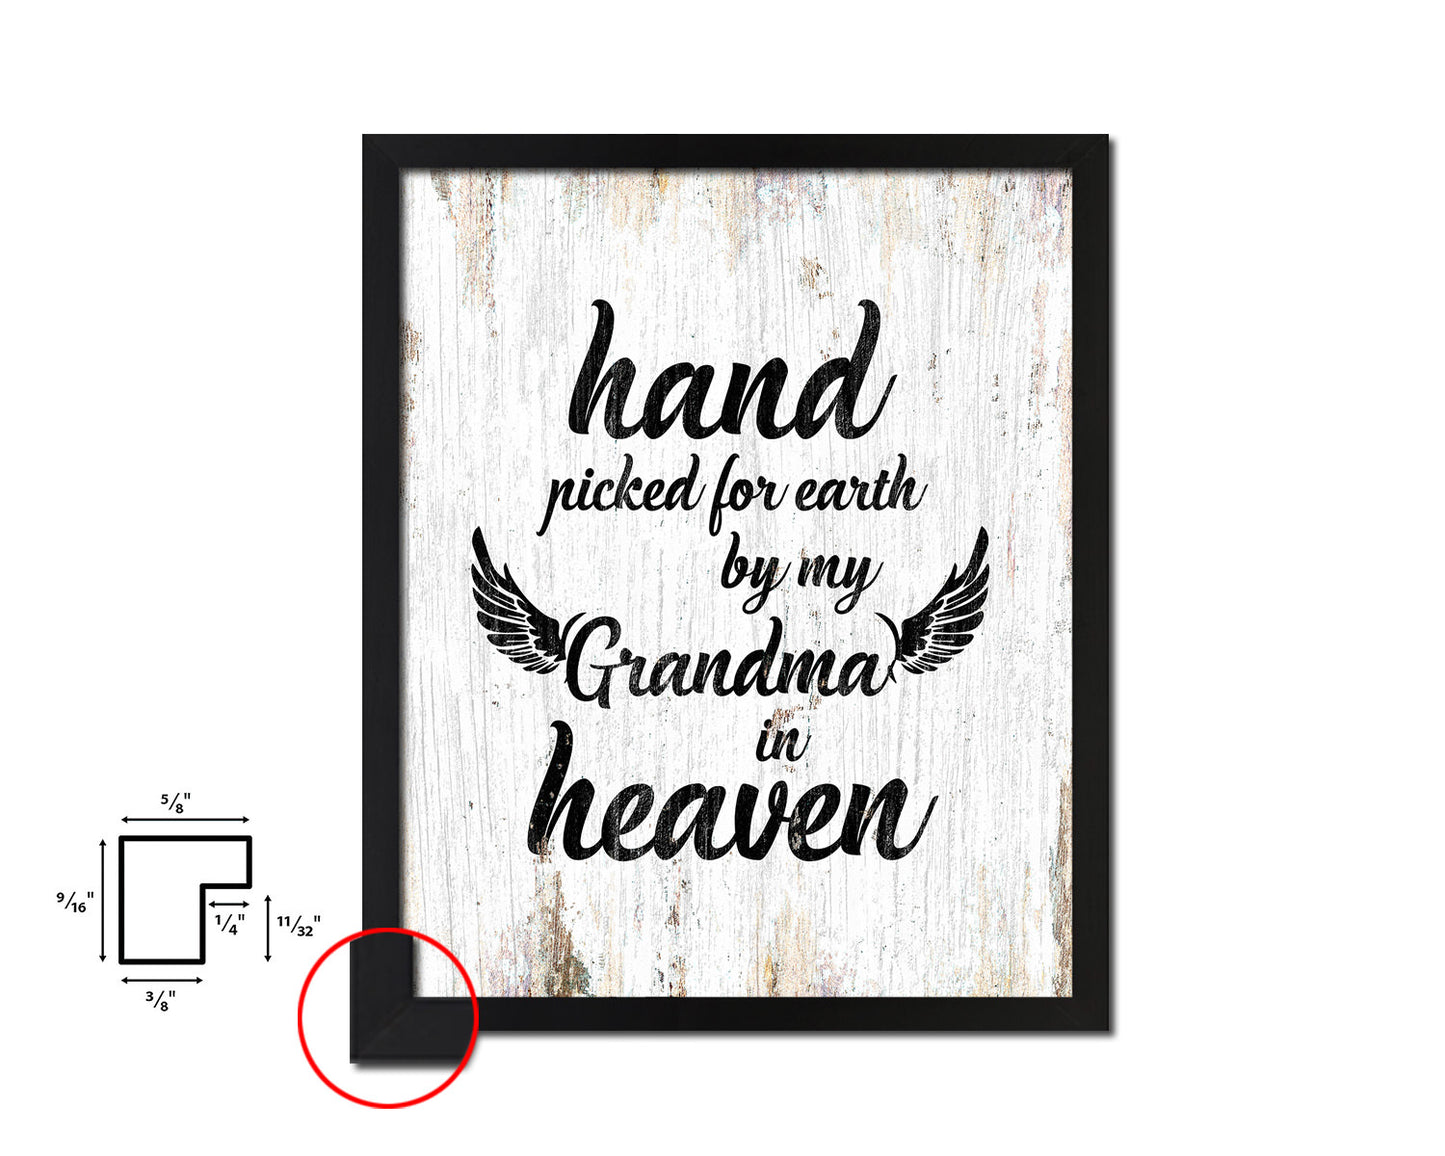 Hand picked for earth by our grandma in heaven Quote Framed Print Wall Art Decor Gifts